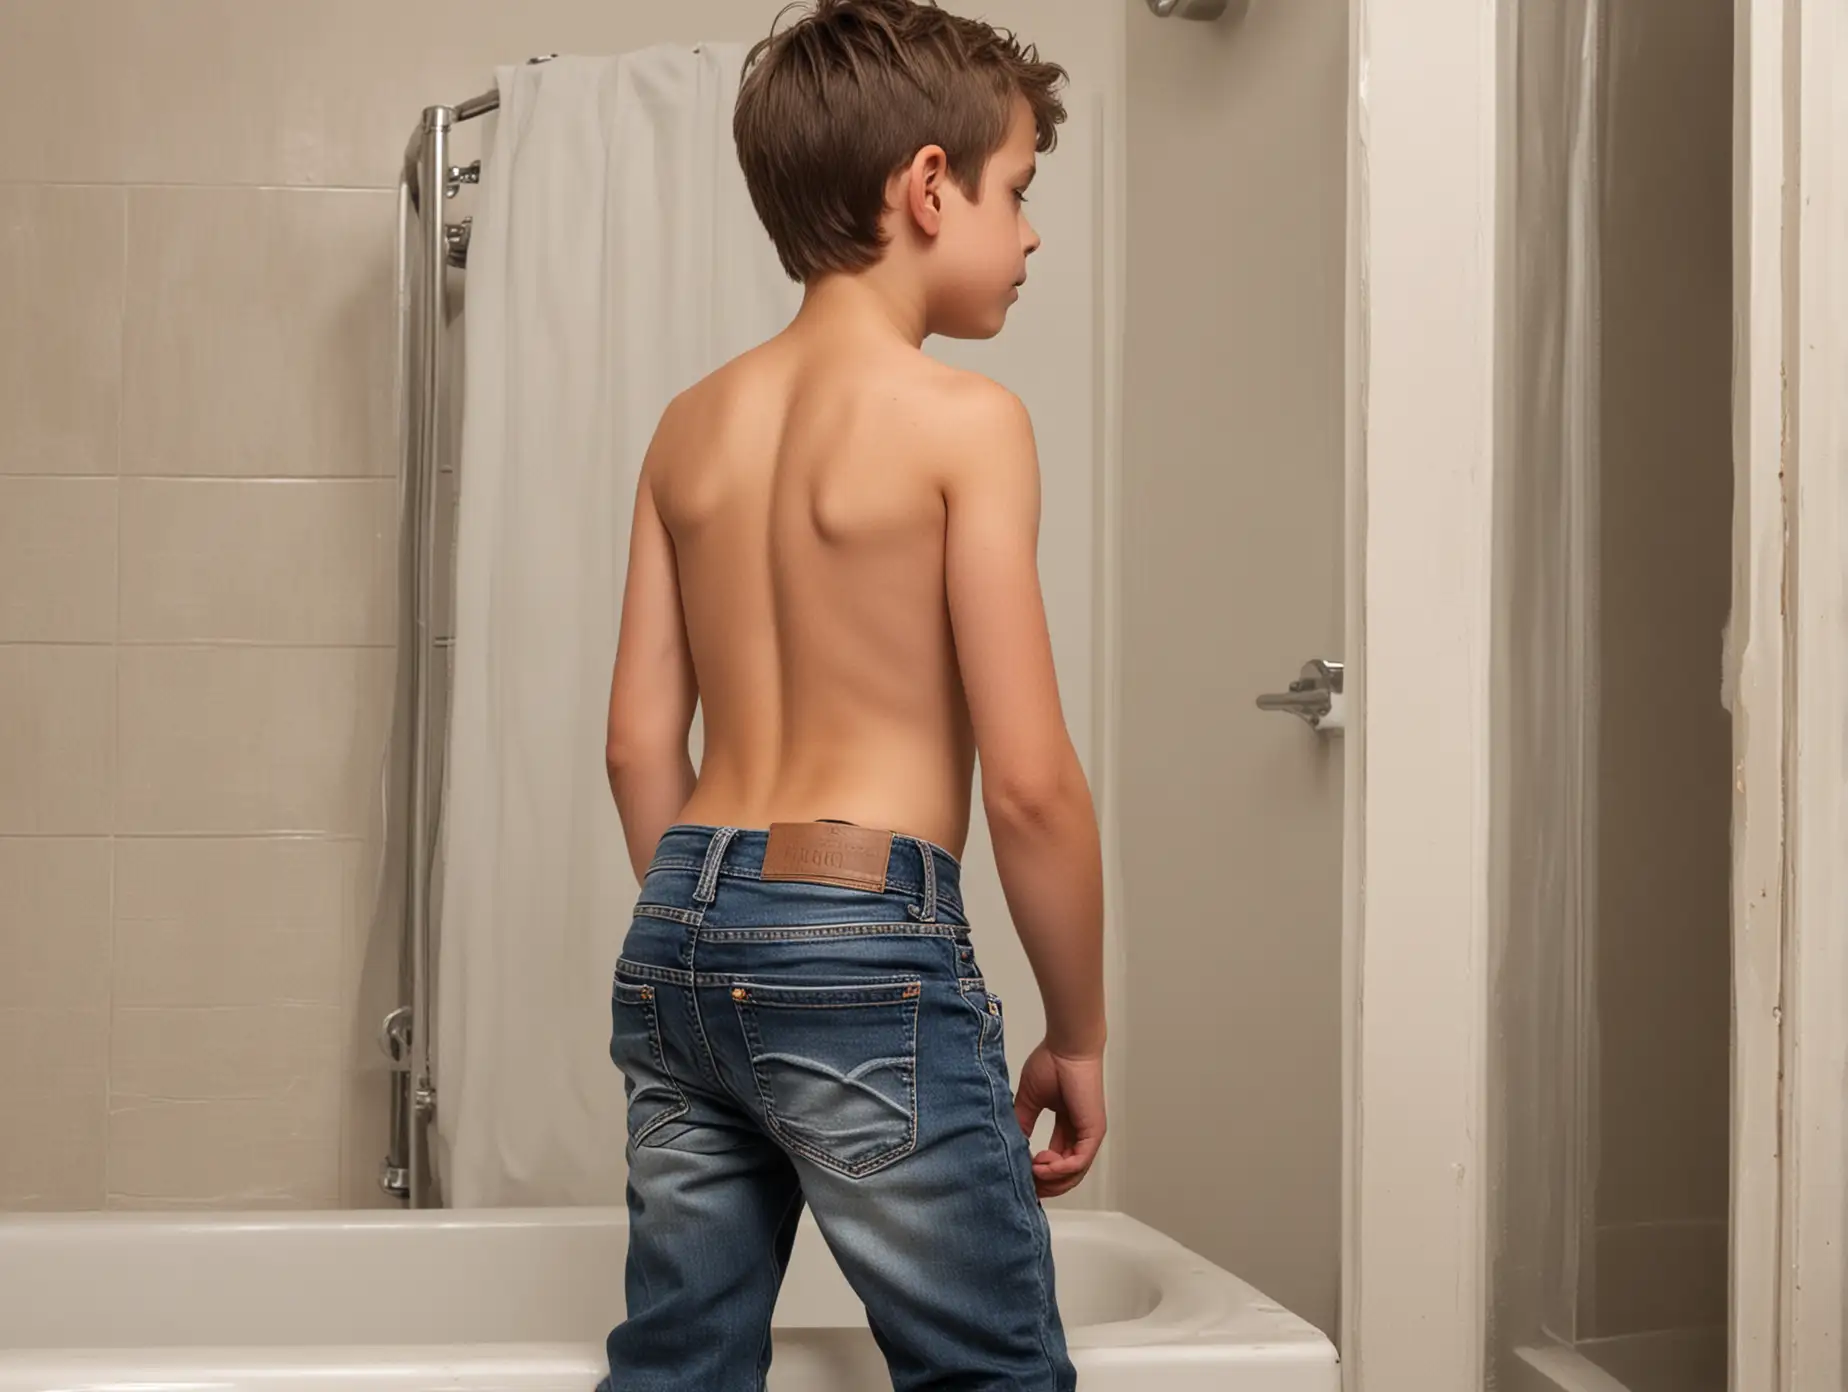 10 year old boy with tight jeans half way on, top off, inside a bathroom